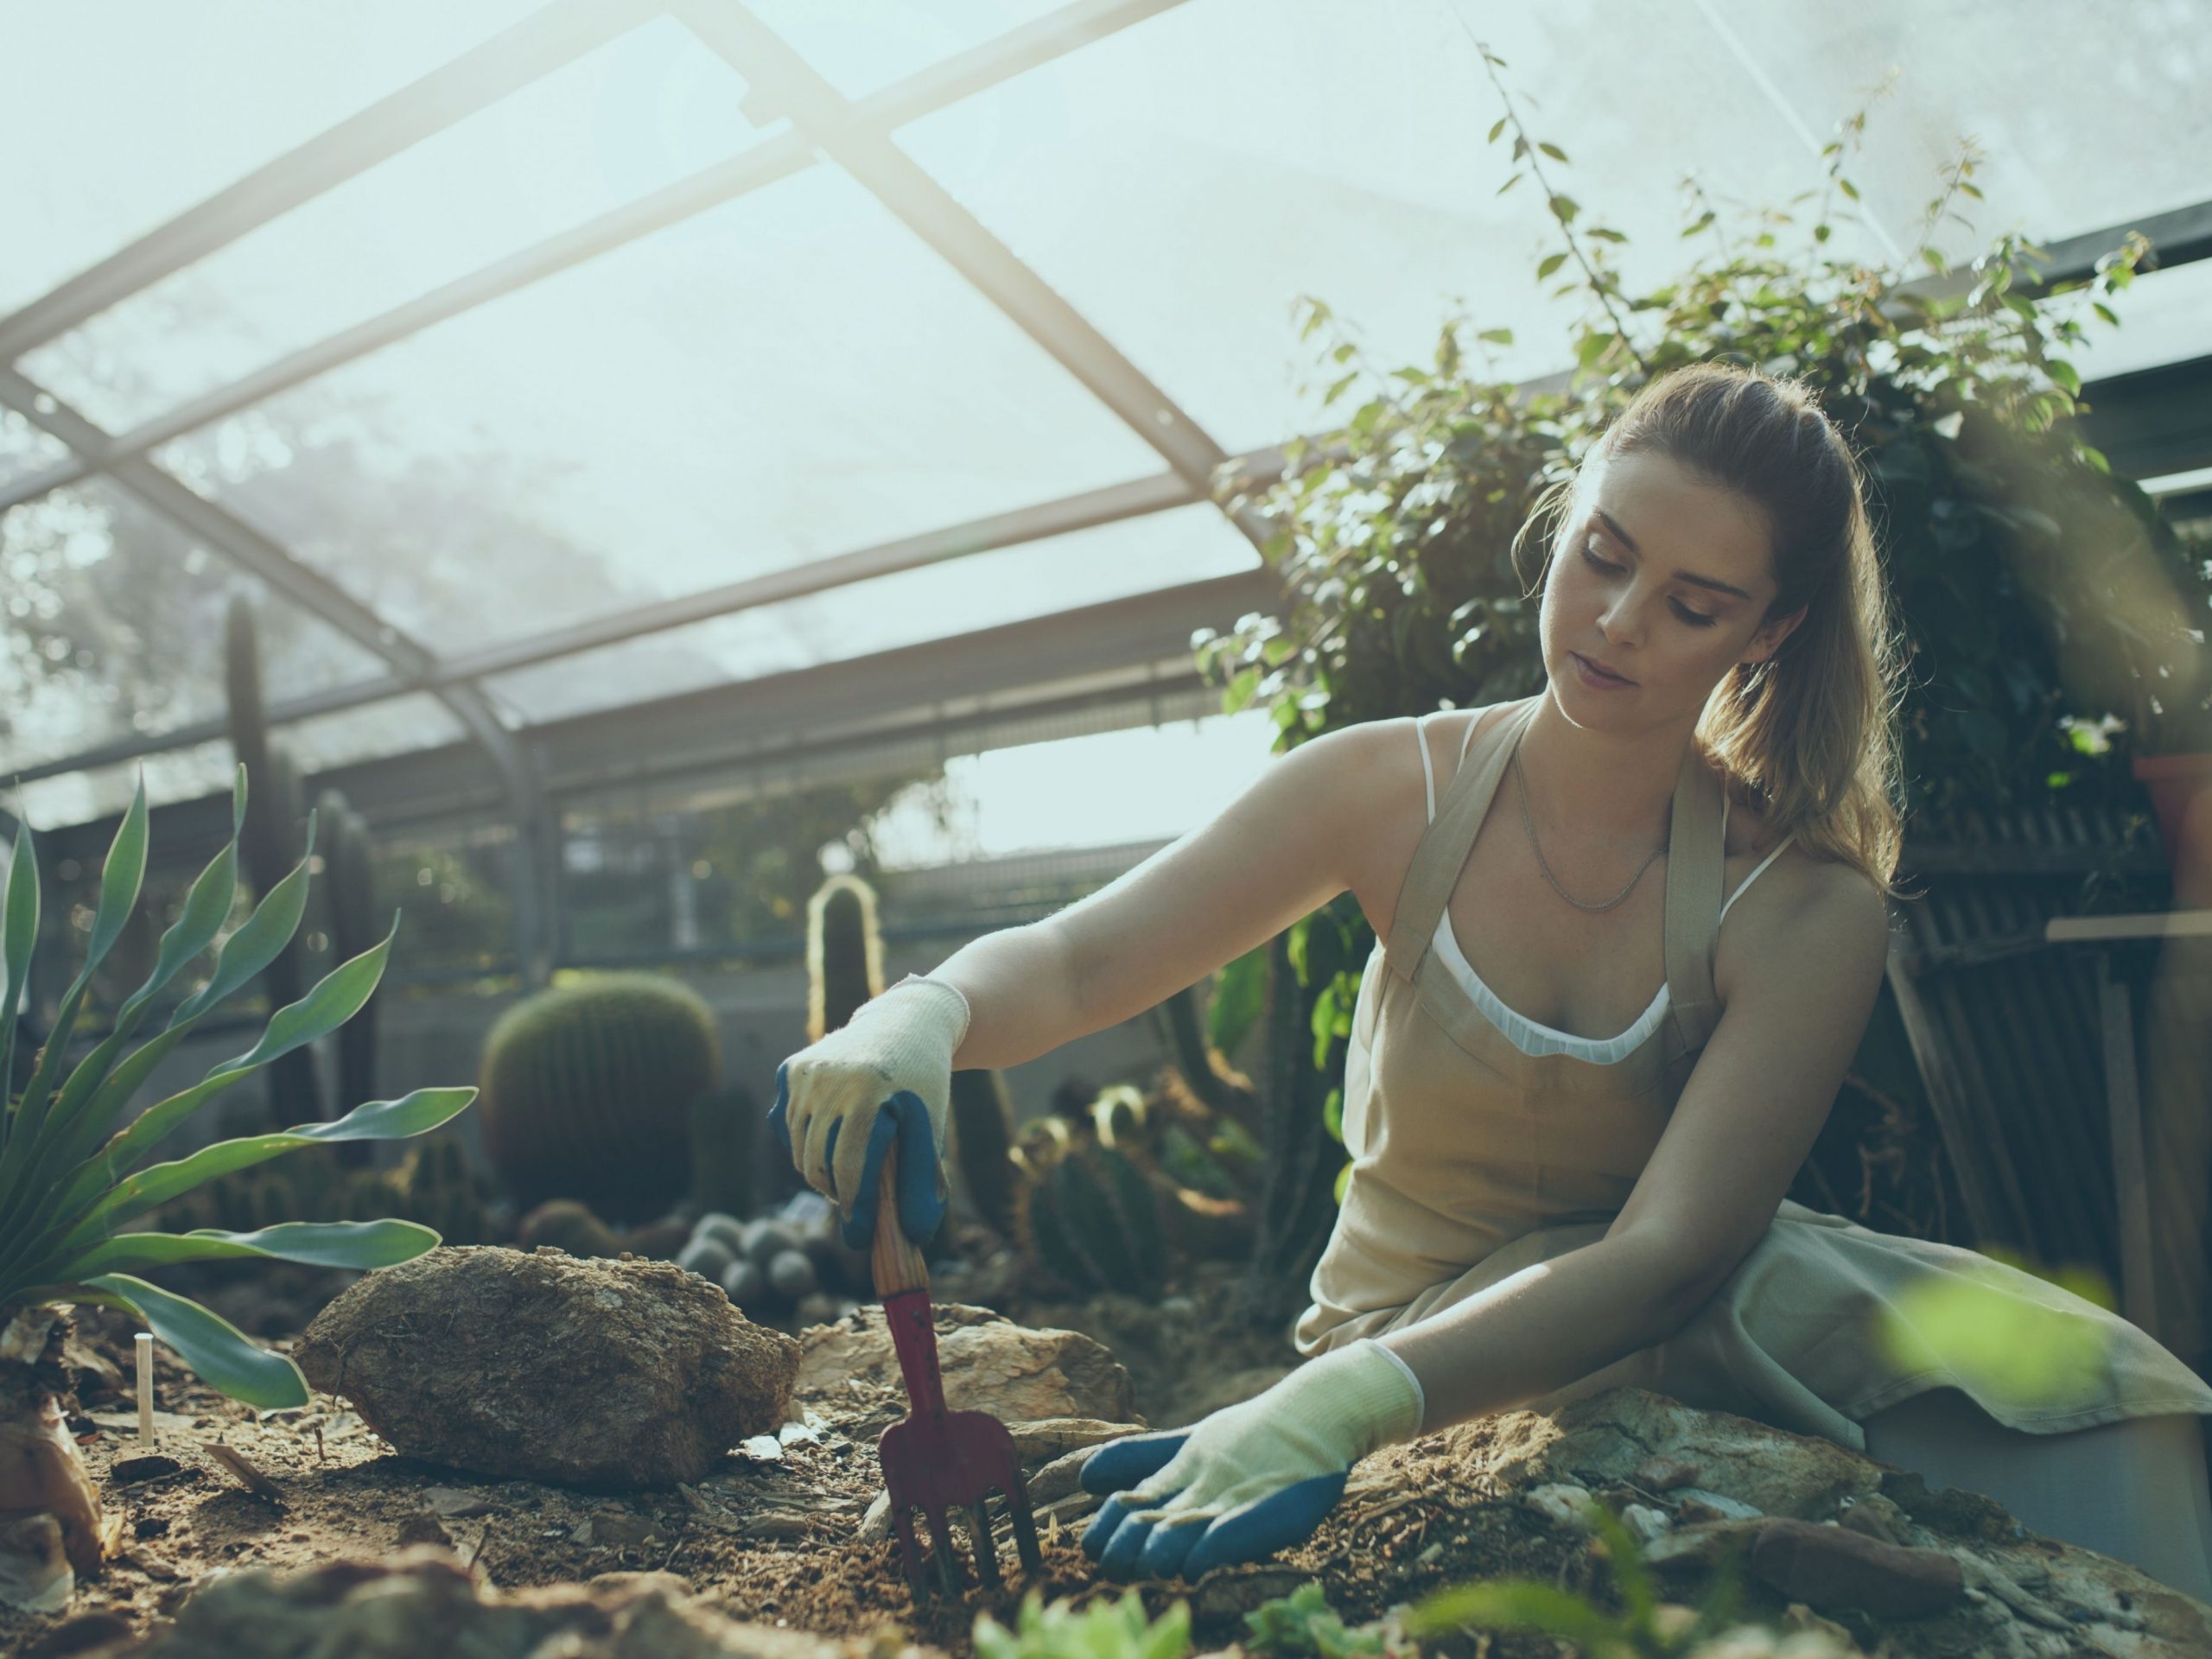 Gardening and Fitness – Can gardening really help you get fitter?